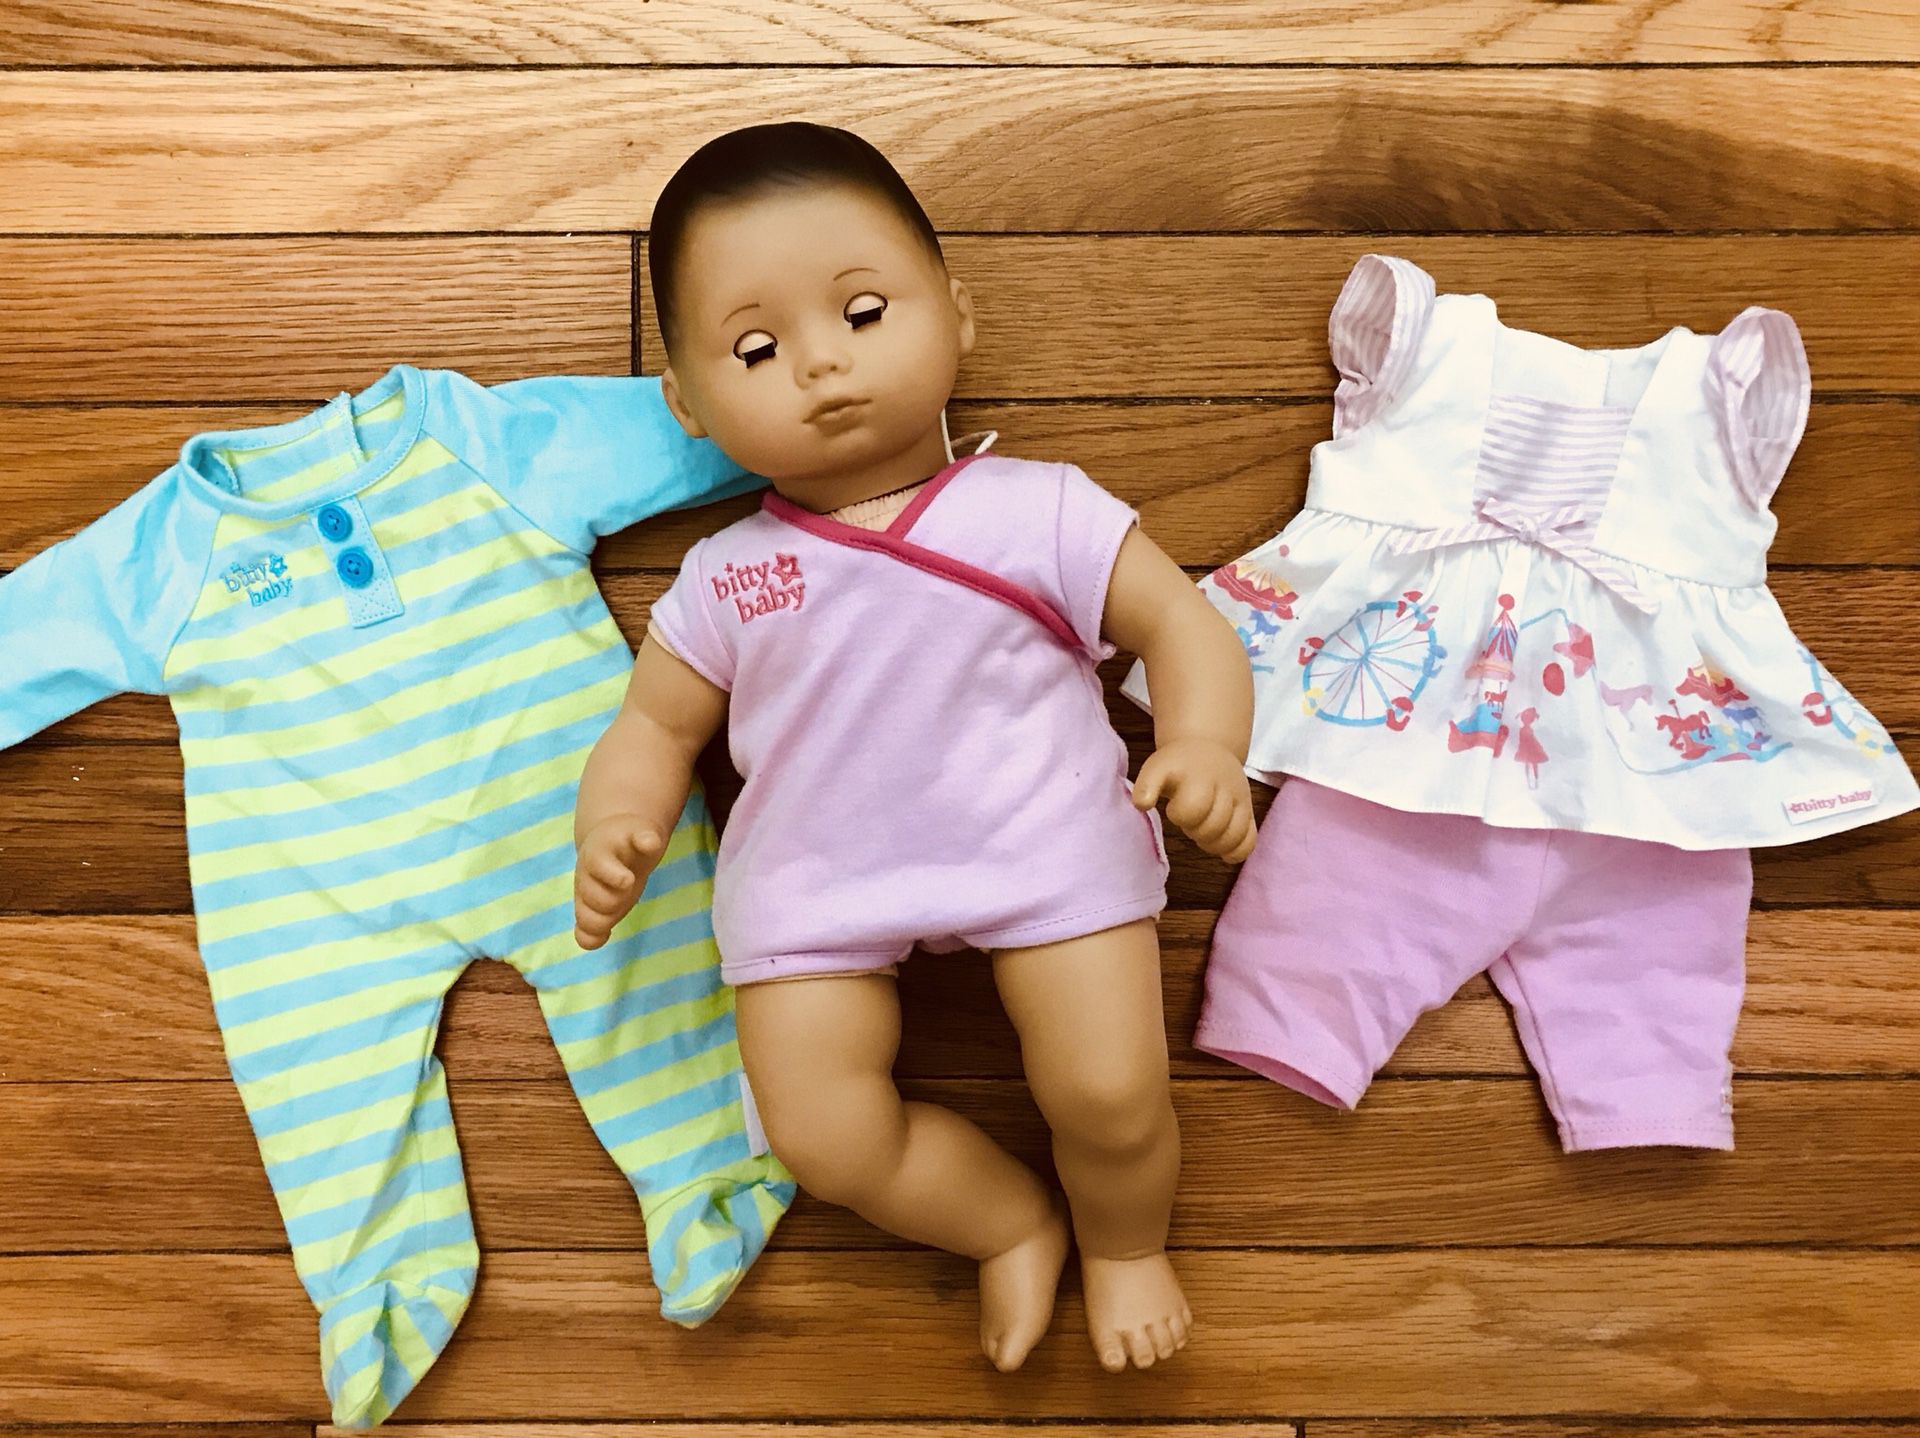 American Girl Doll “Bitty Baby” with 3 AGD outfits